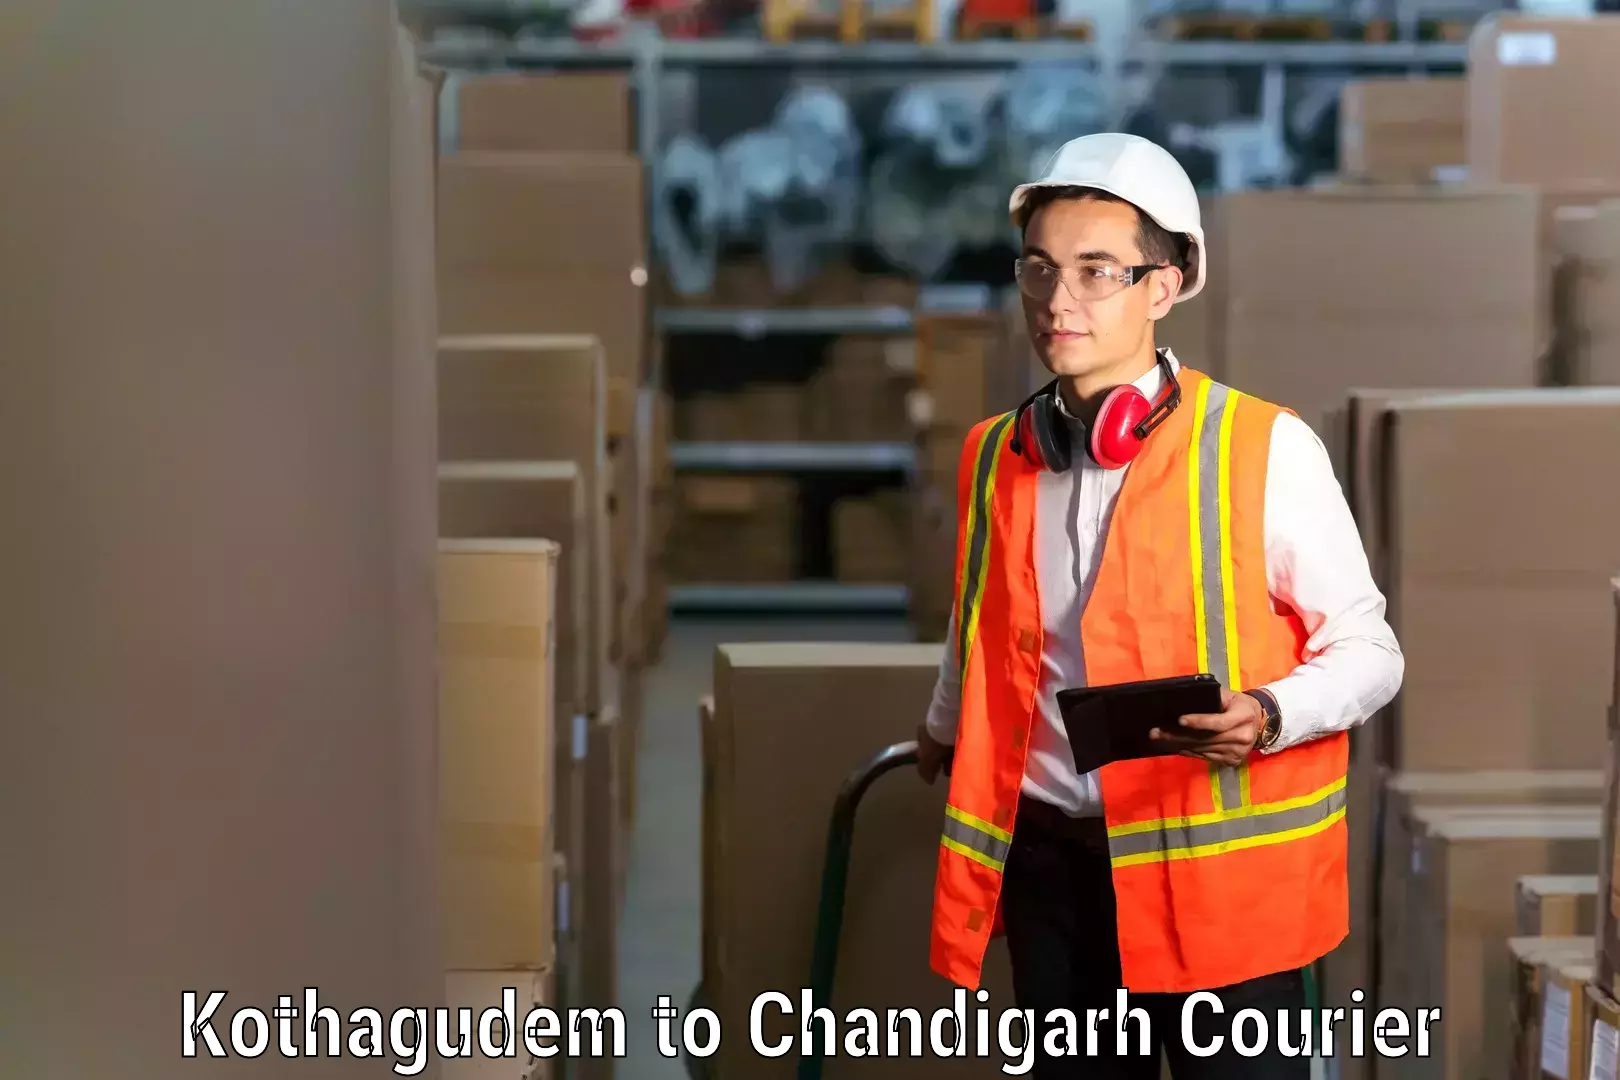 Quality moving and storage Kothagudem to Chandigarh